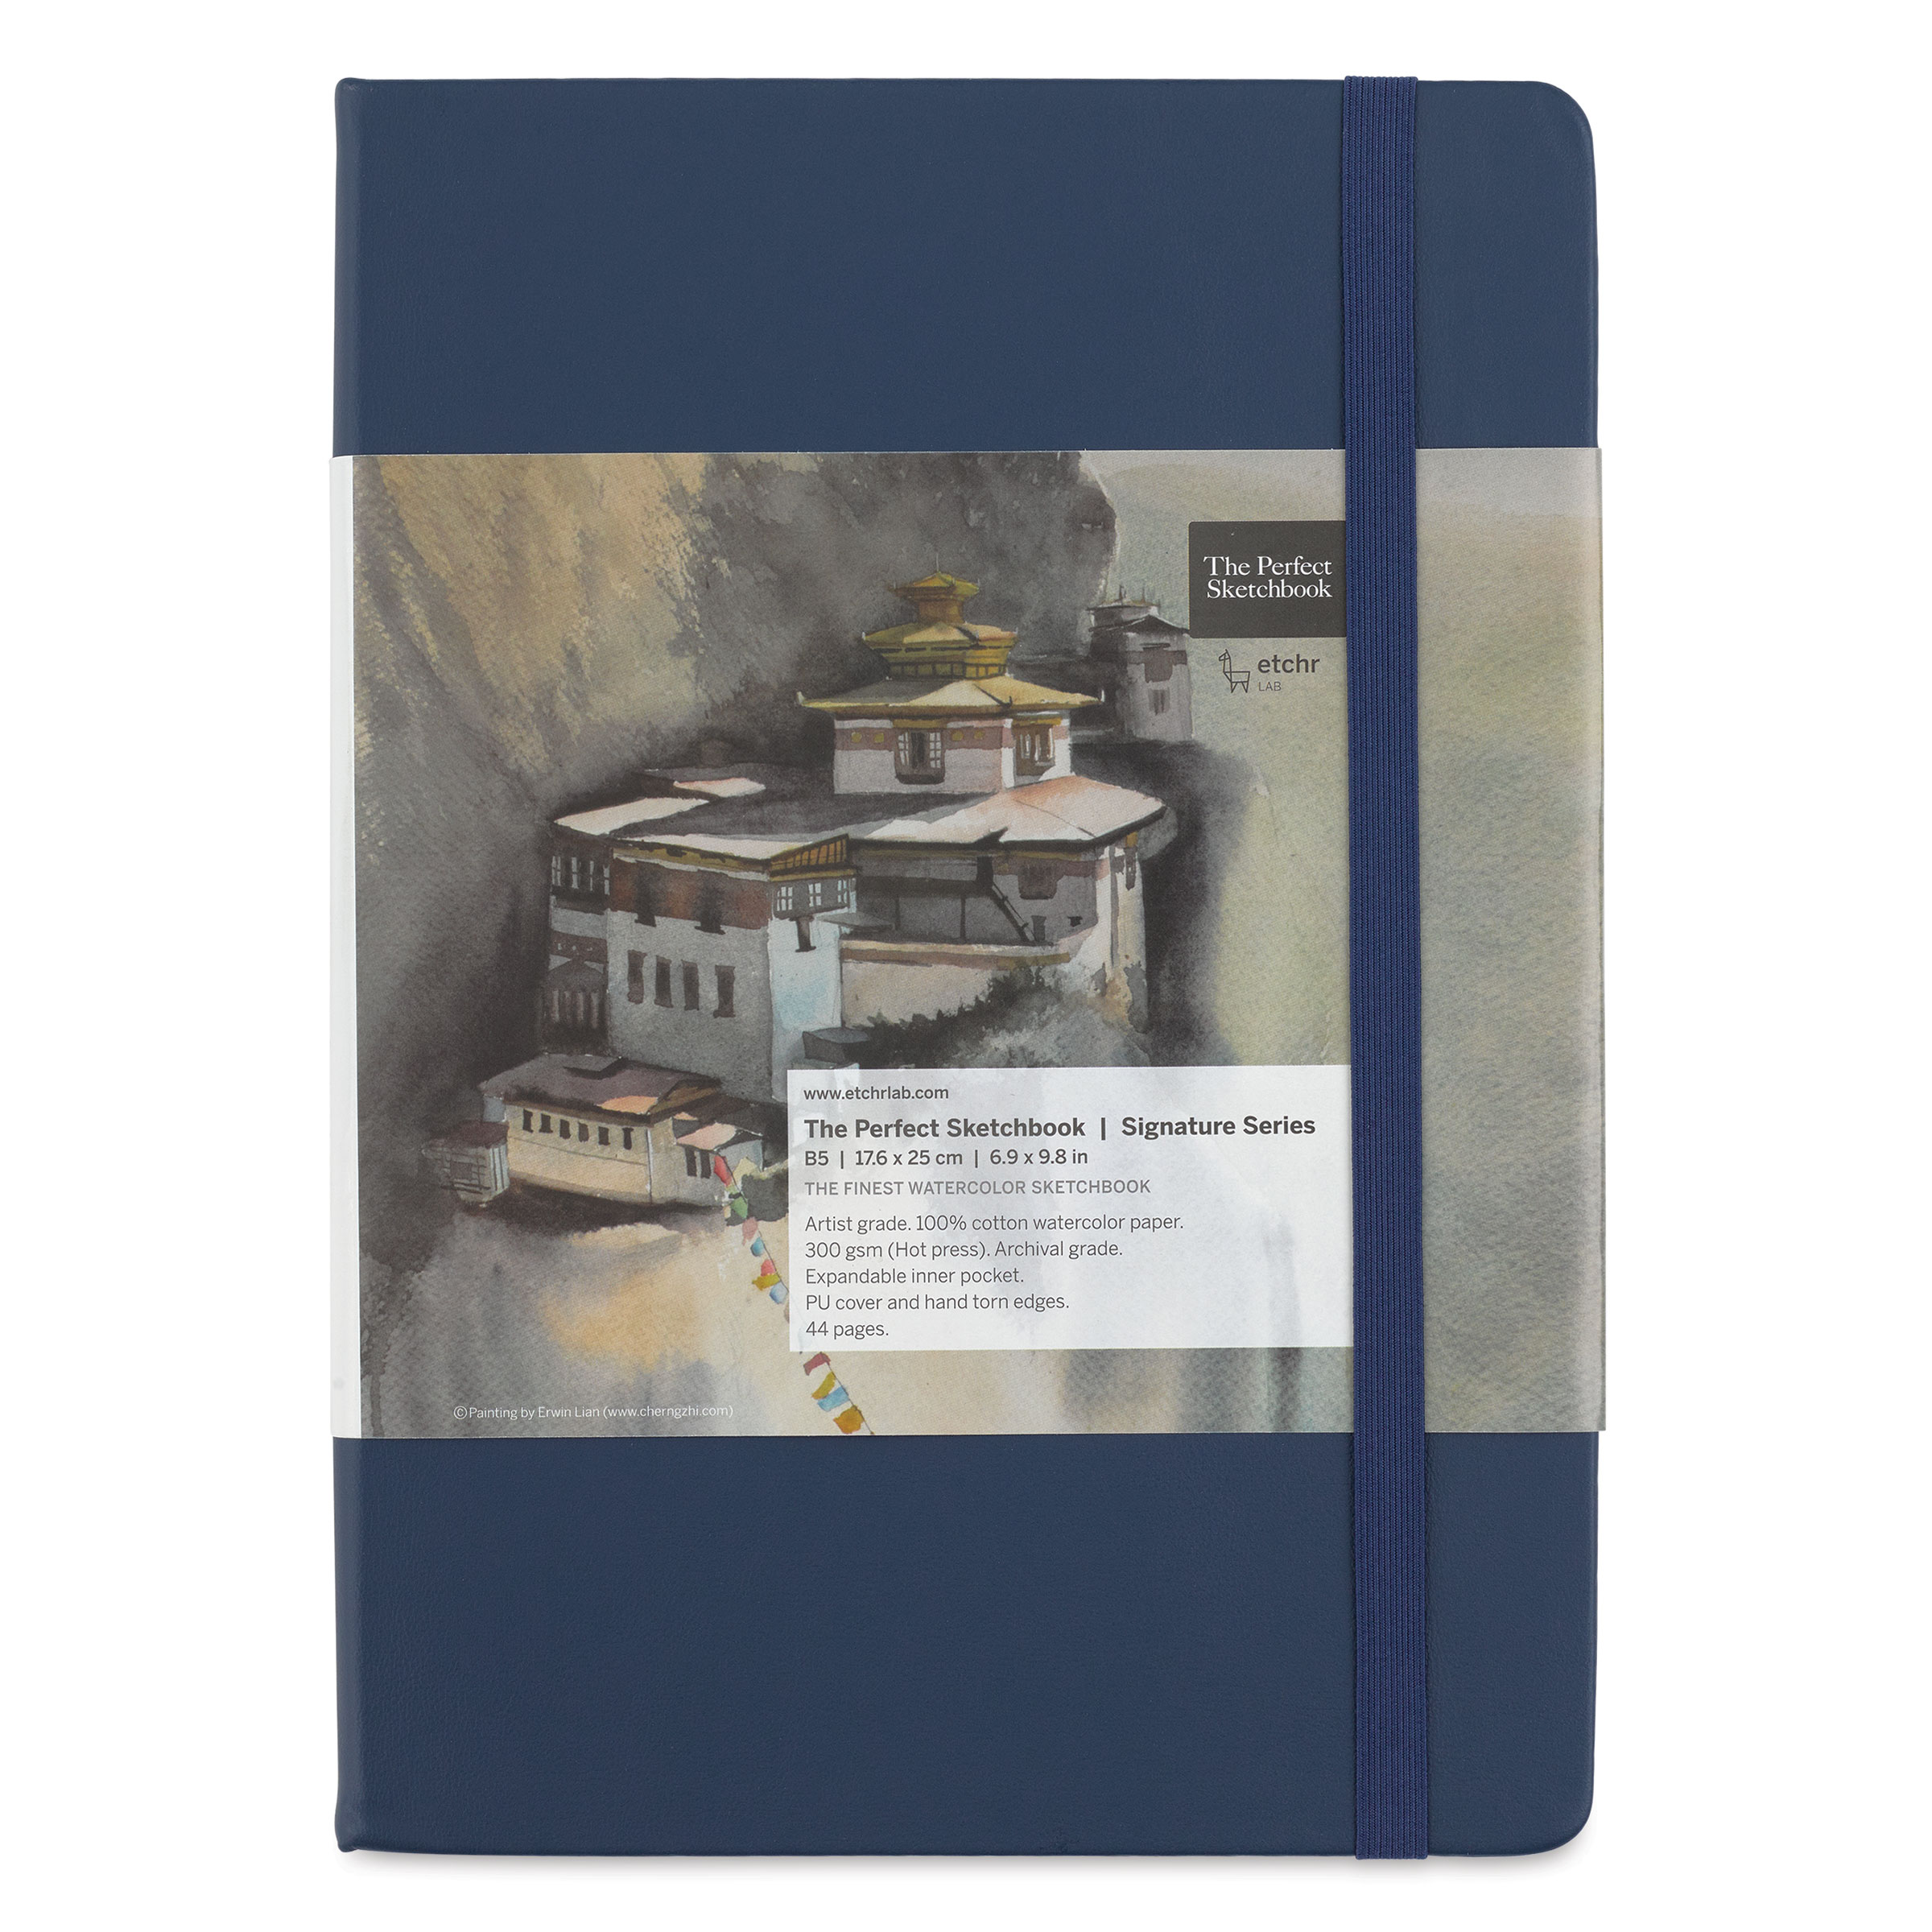 Etchr Panoramic Watercolour Sketchbooks